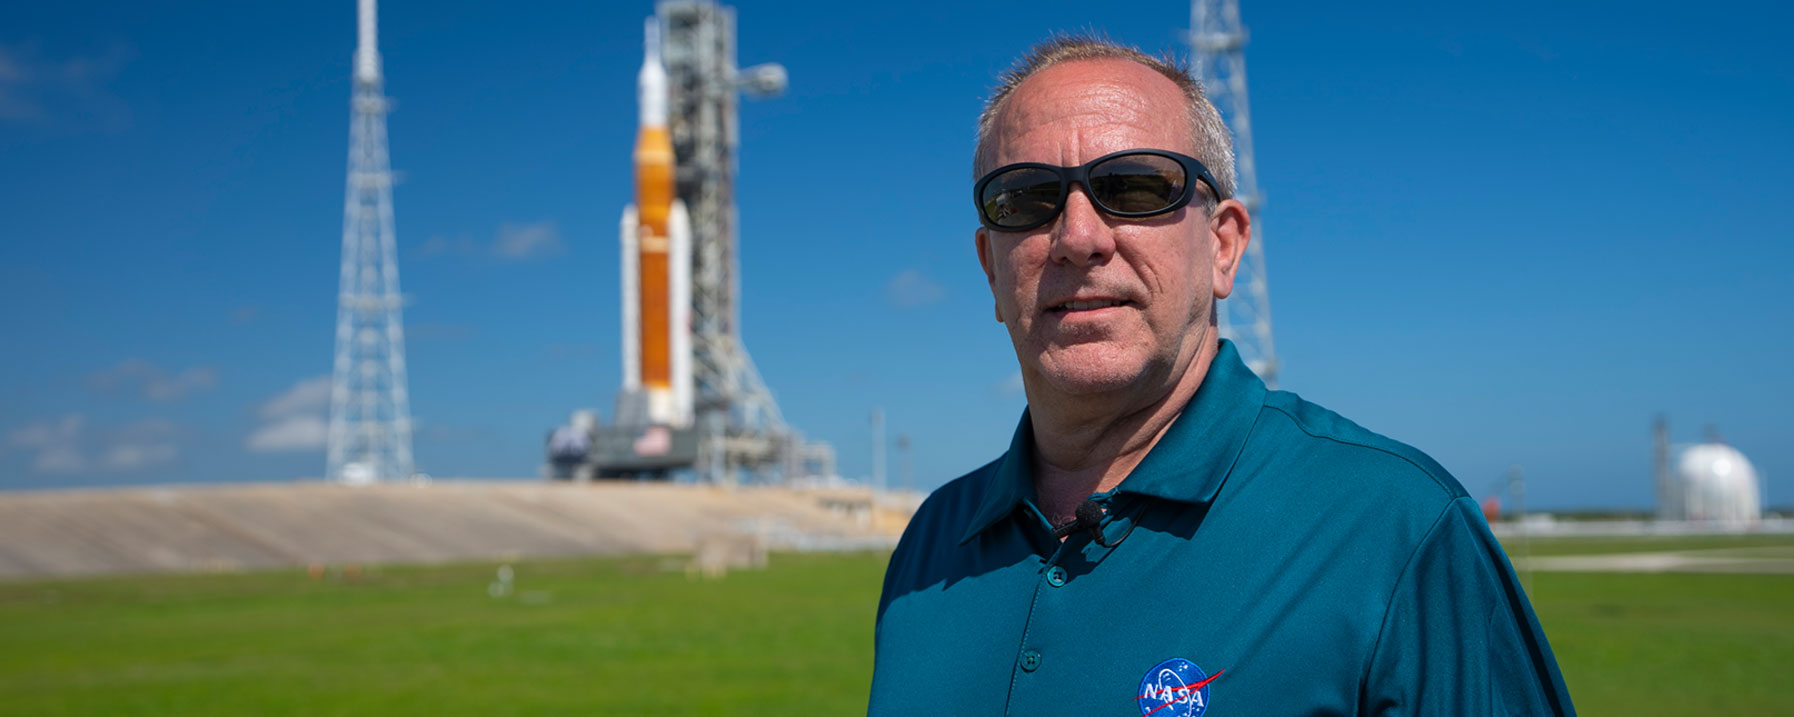 David Beaman, manager of the Space Launch System (SLS) Engineering & Integration Office at NASA’s Marshall Space Flight Center in Huntsville, Alabama, views the SLS rocket on the launch pad.